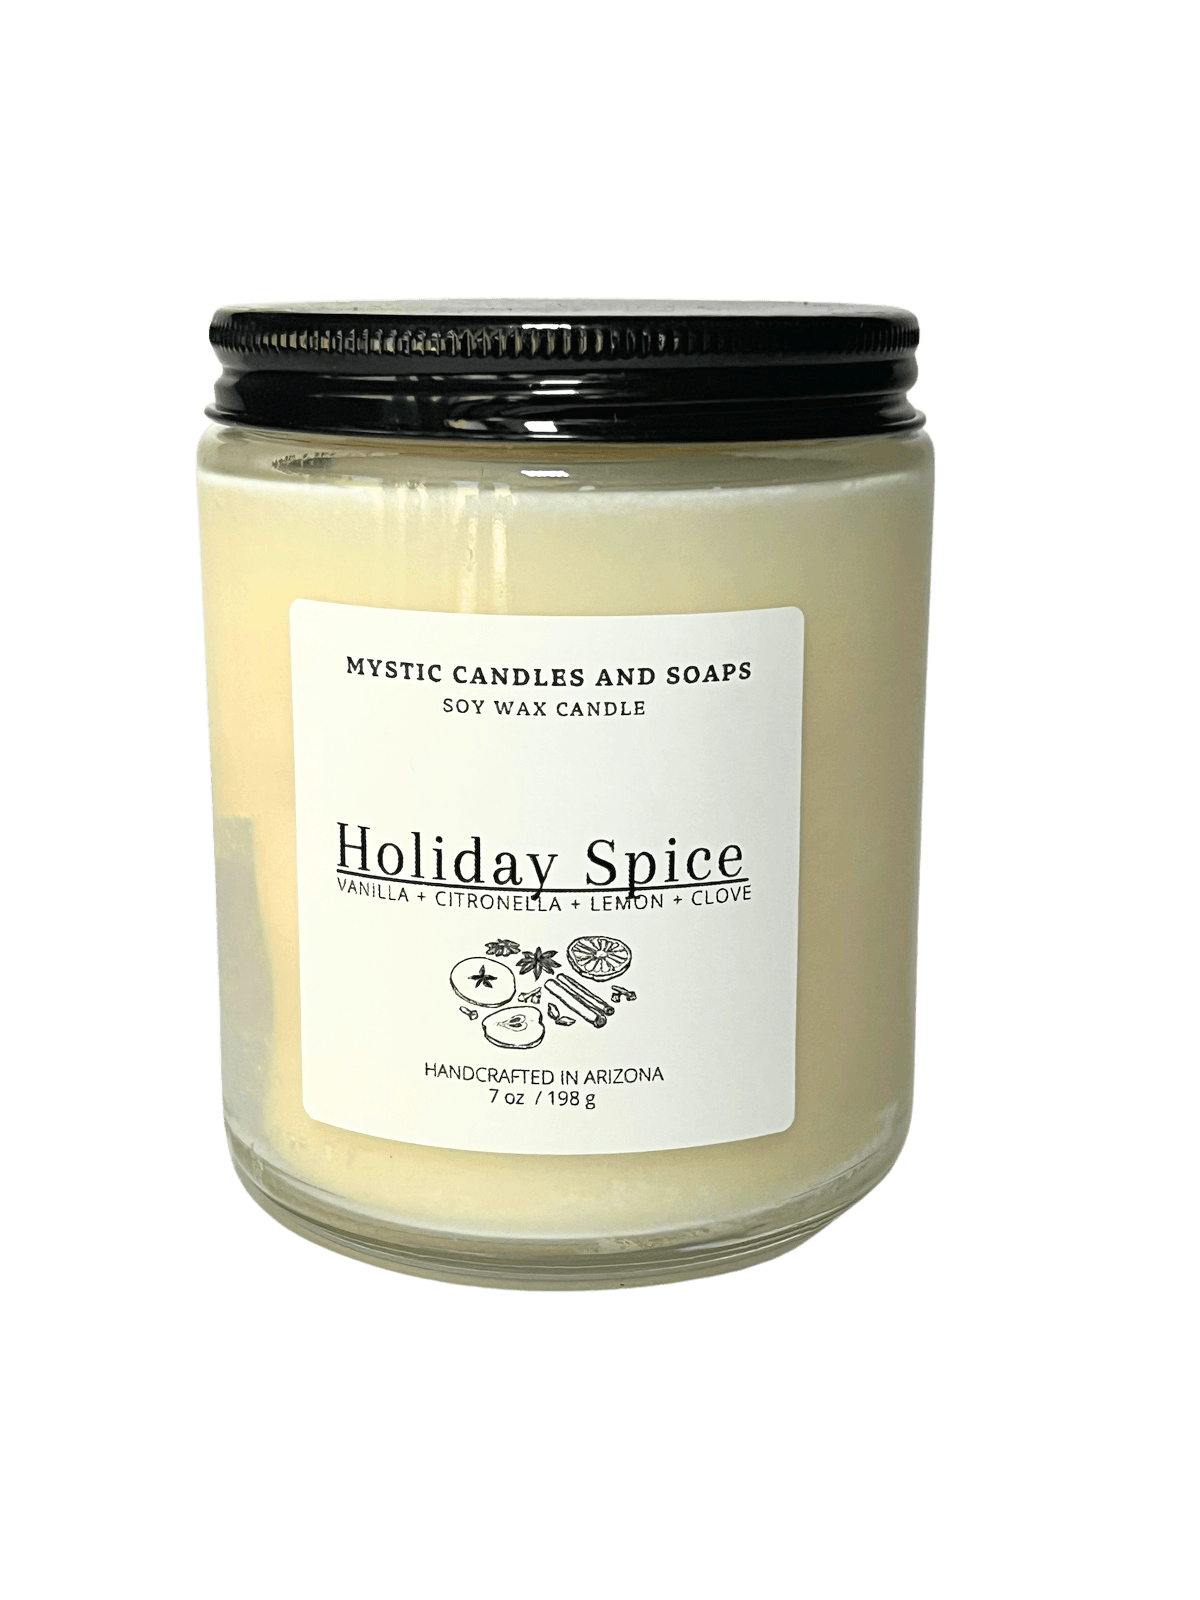 Holiday Spice Candle - Mystic Candles and Soaps LLC